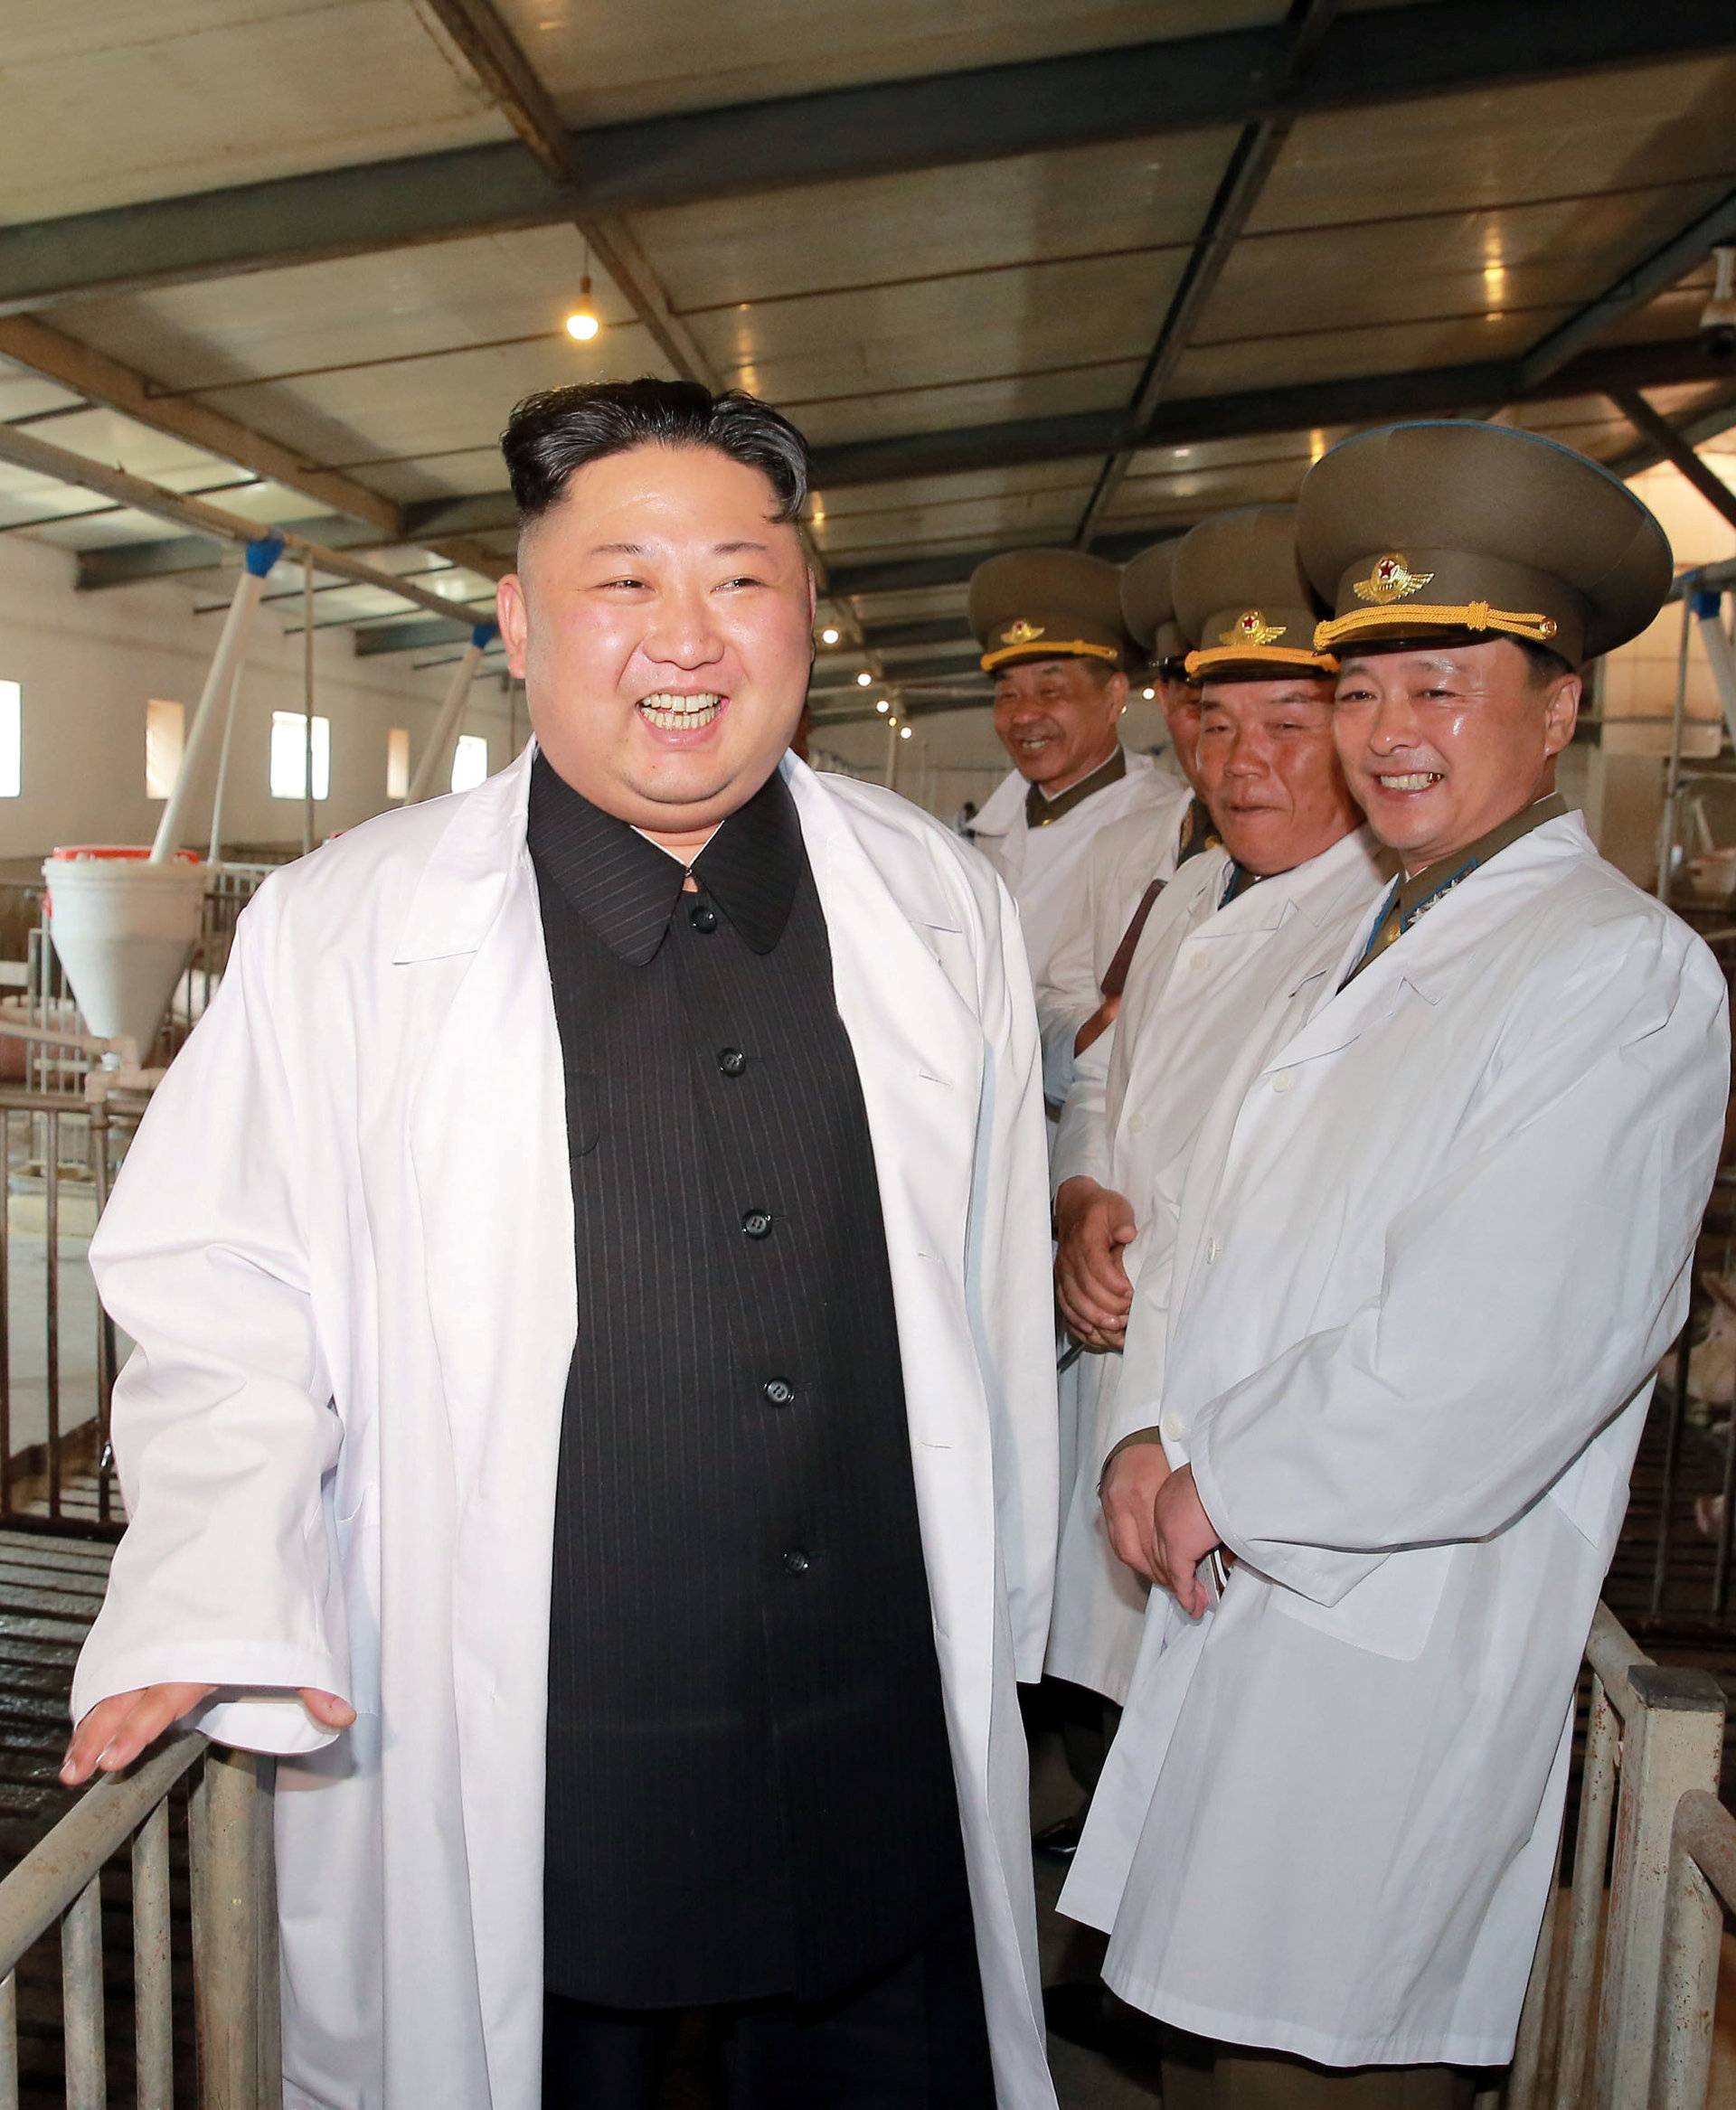 KCNA photo shows a visit by North Korean Leader Kim Jong Un to the Thaechon Pig Farm of the Air and Anti-Air Force of the Korean People's Army